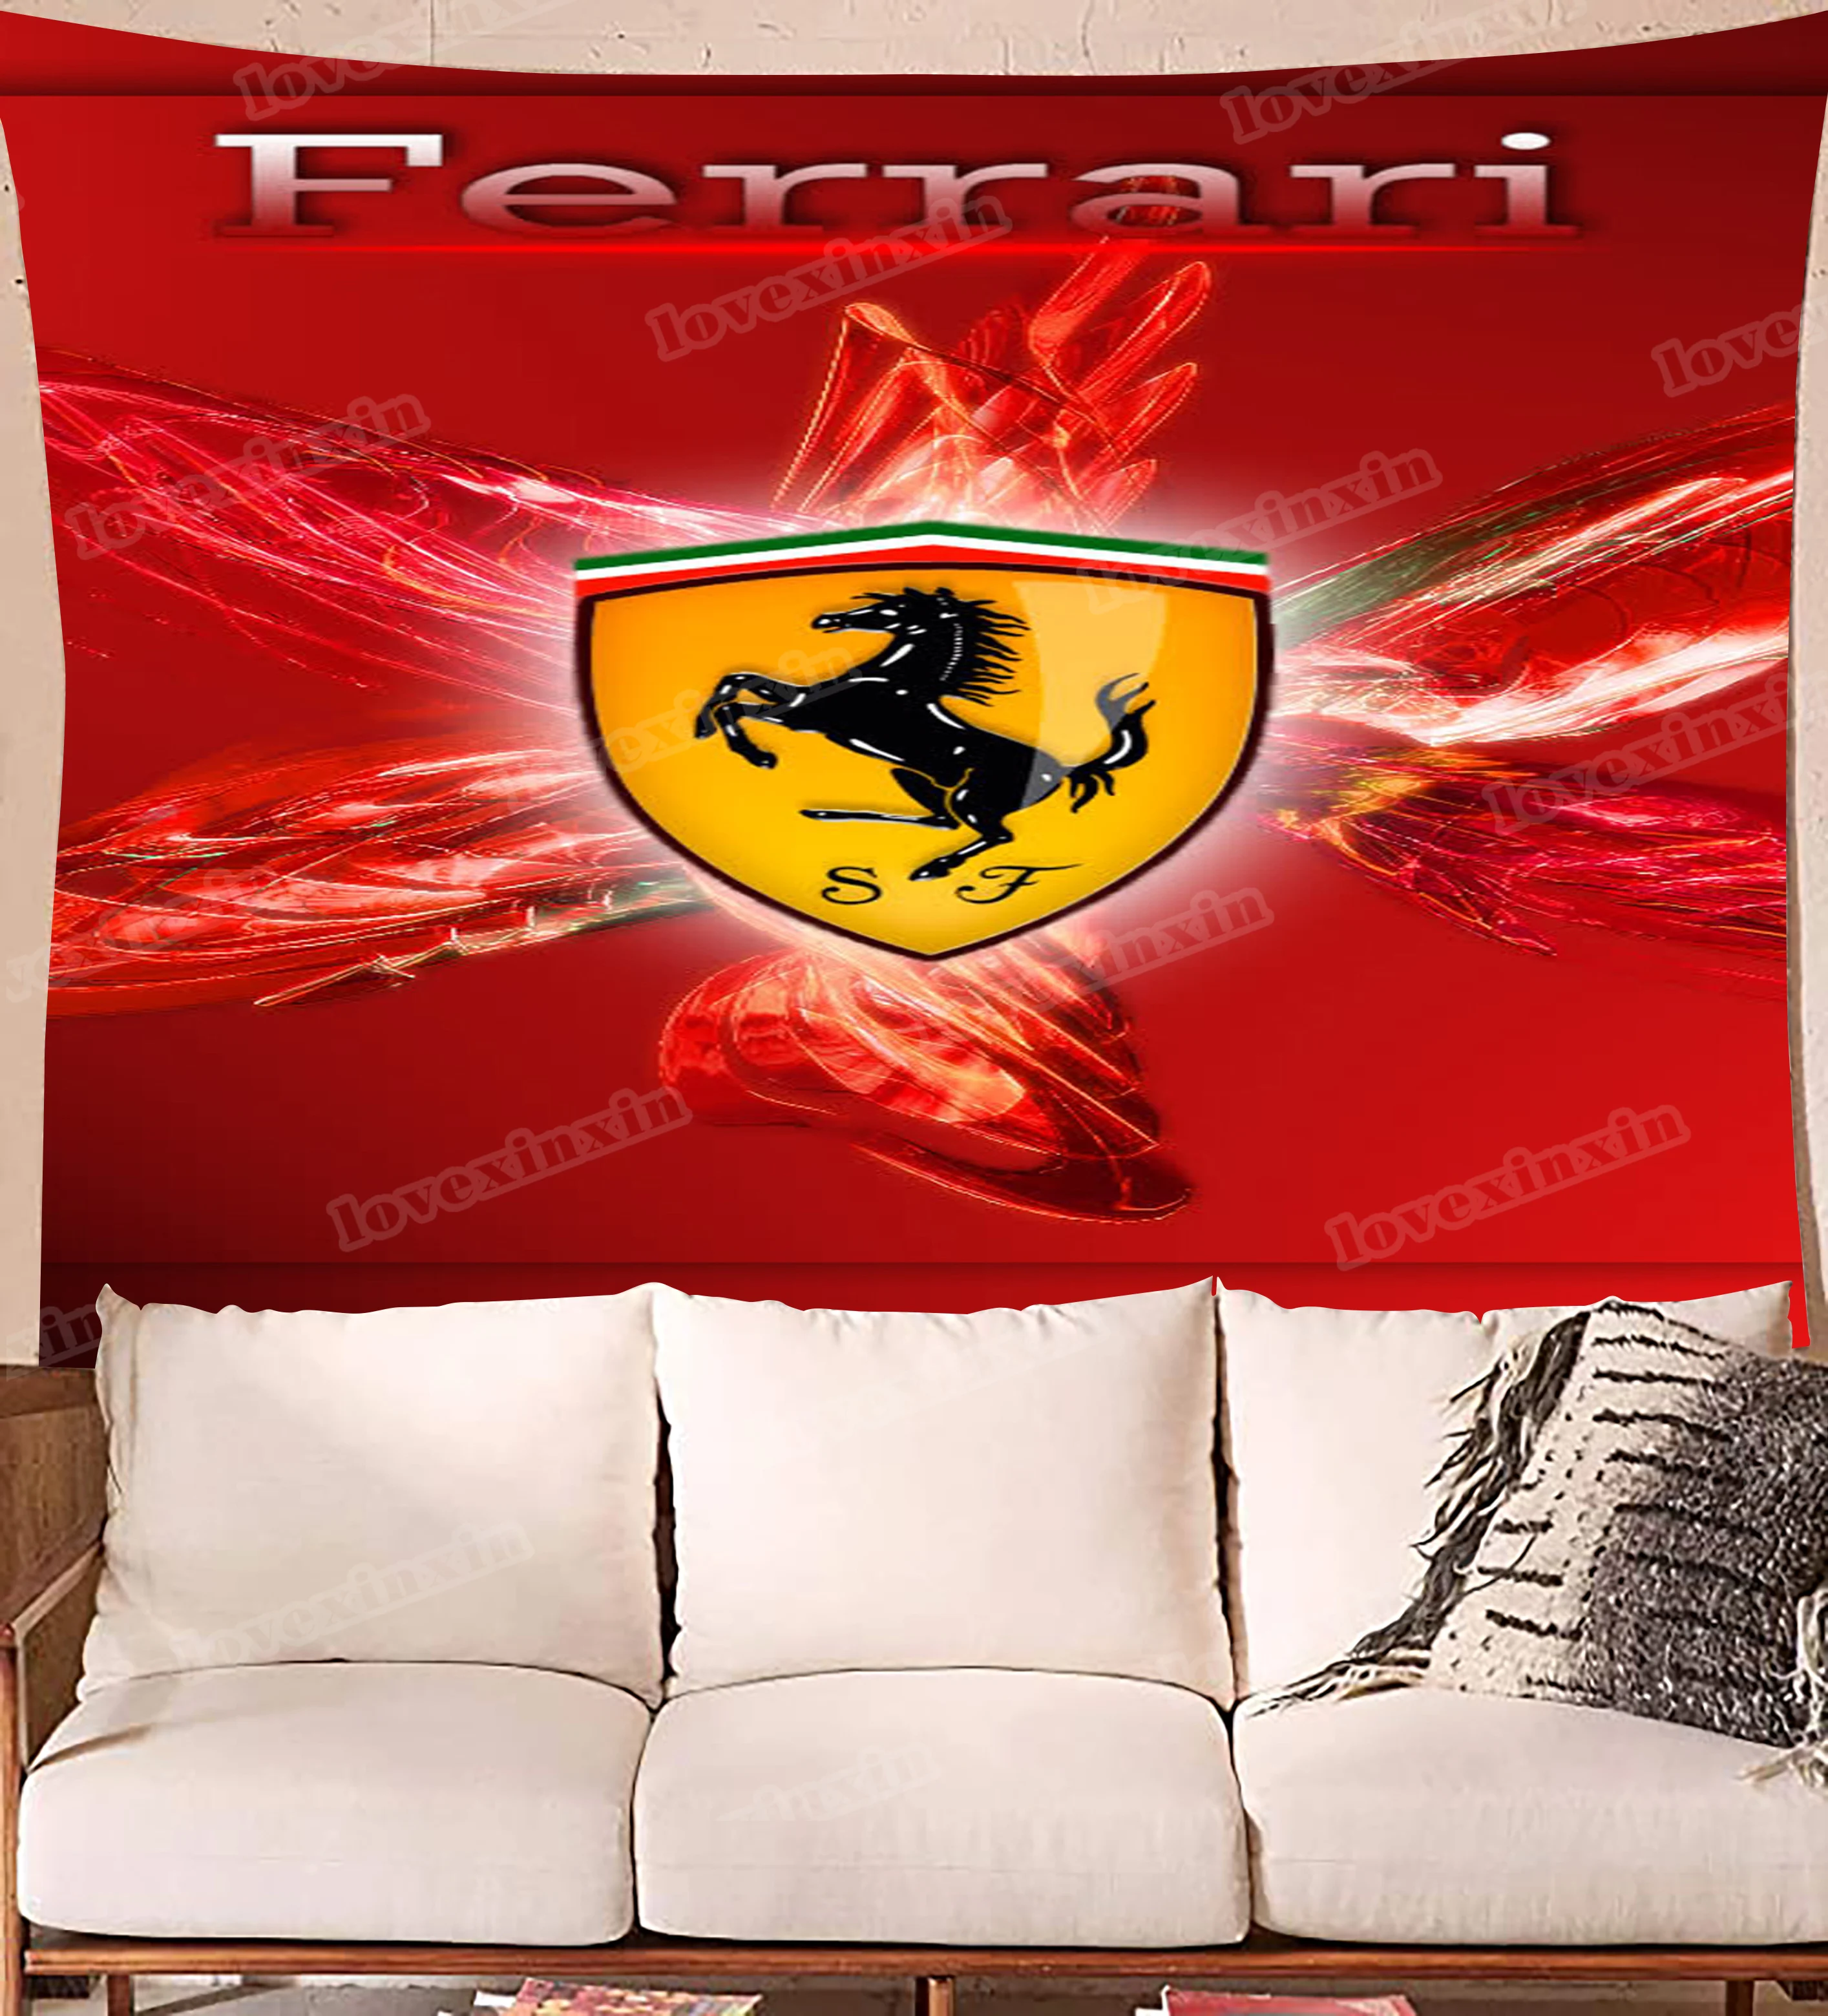 

Ferrari Tapestry Wall Hanging Luxury Tapestry Party Supplies for Party Banner Backdrop Poster Wall Decoration 60x40 Inches